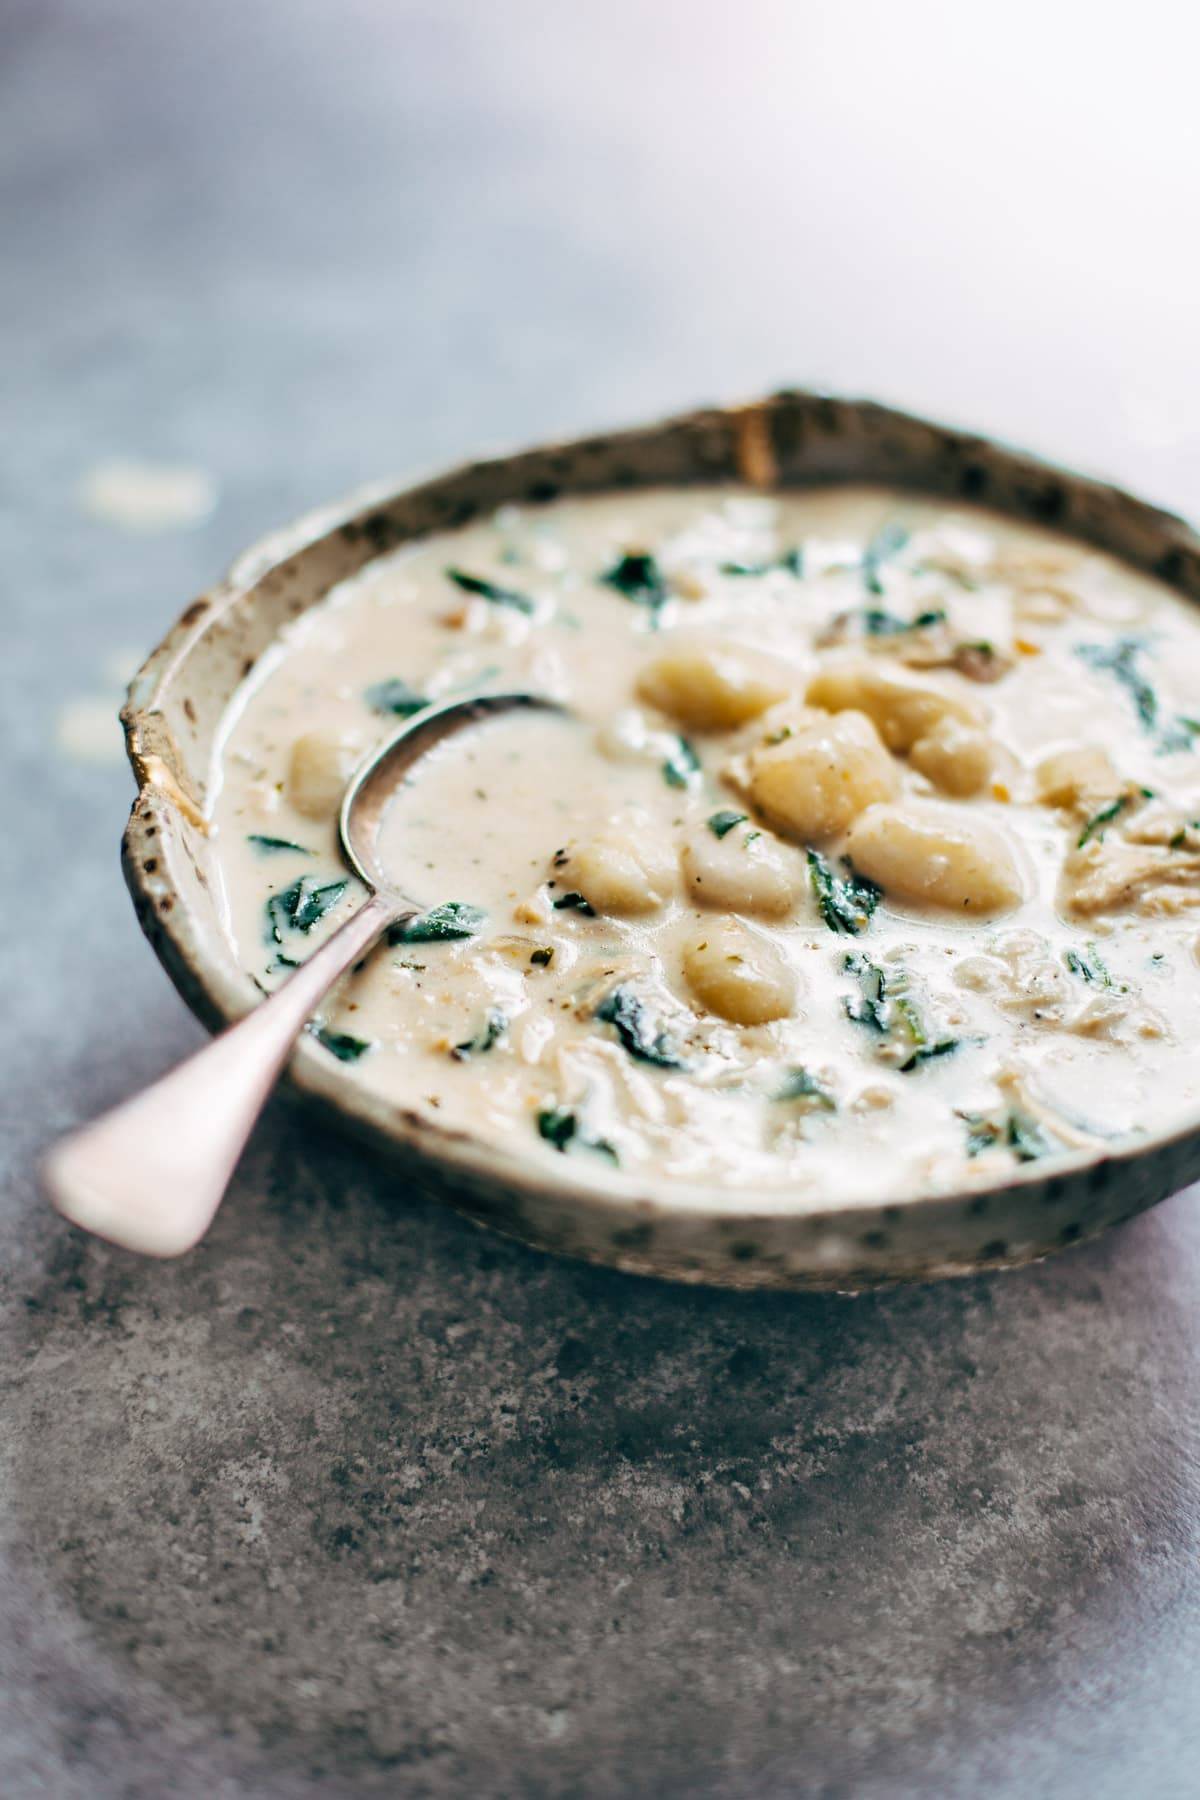 Crockpot Chicken Gnocchi Soup - a simple, velvety, back-to-basics meal! Easy to make with familiar ingredients - chicken, garlic, spinach, carrots, evaporated milk, and bacon. | pinchofyum.com